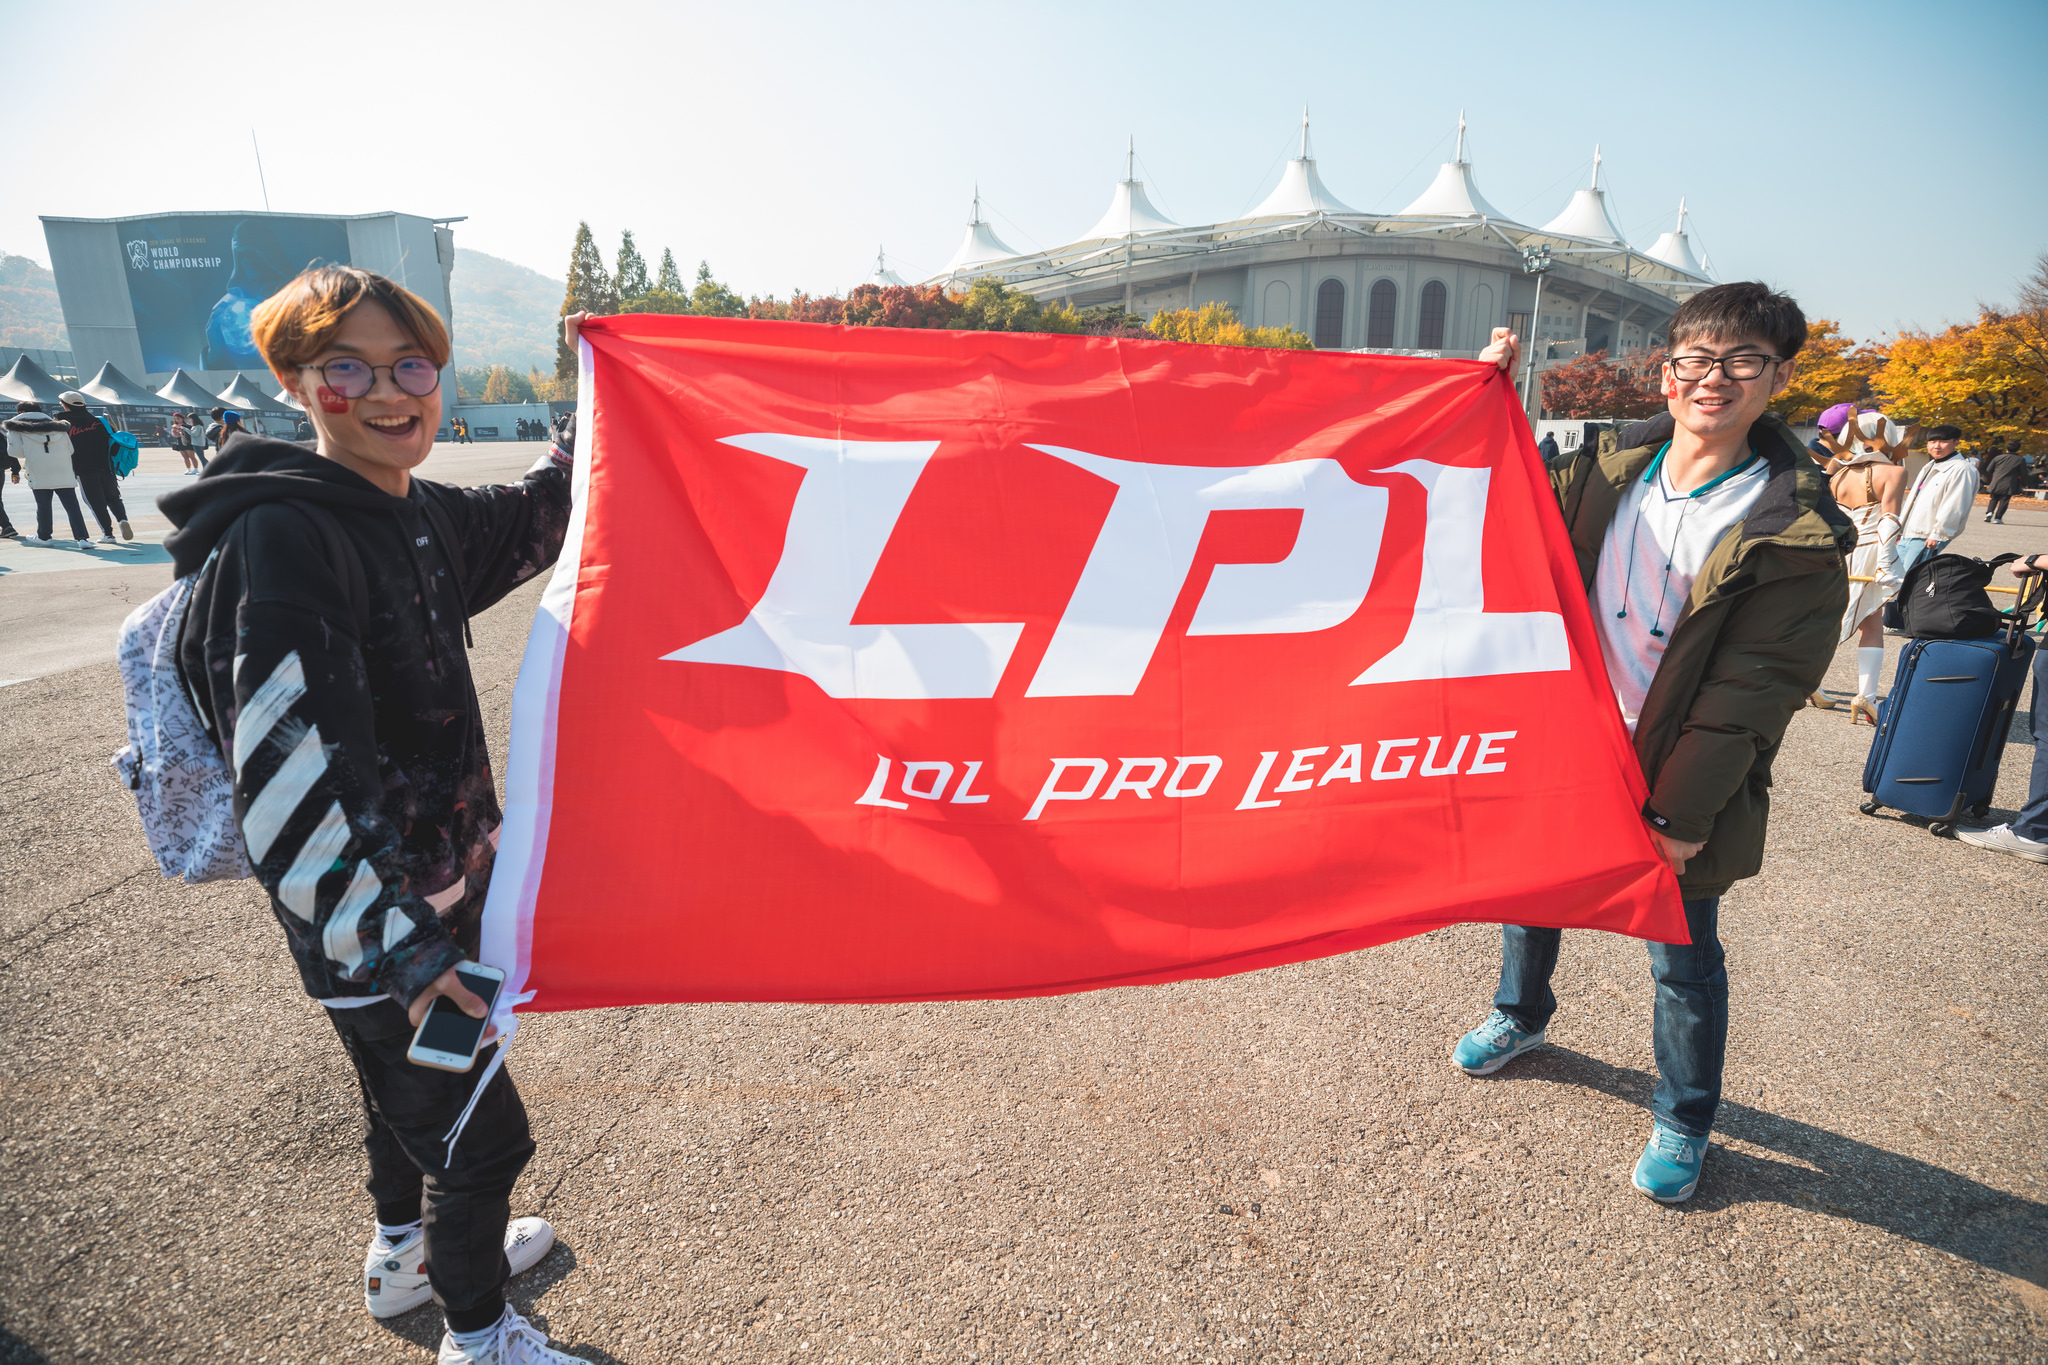 LPL – The Story Of The Last-Place LPL Team Which Went From Last Place To A Four Place Finish In One Split